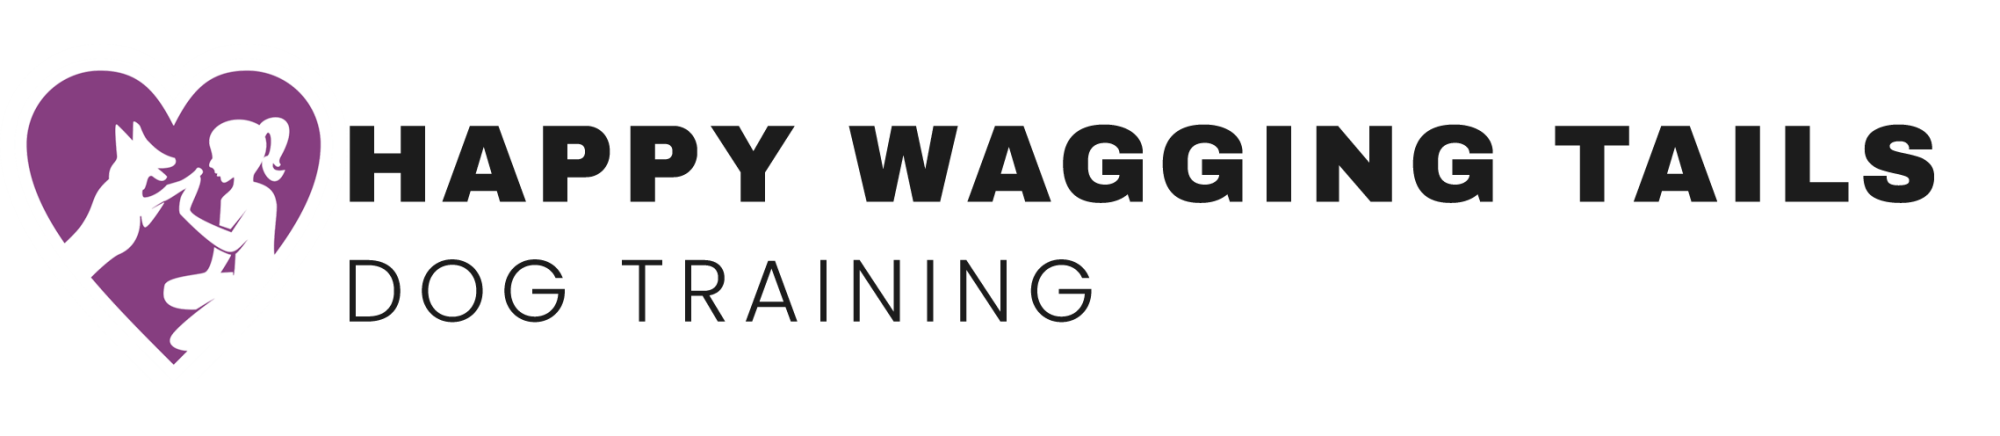 Happy Wagging Tails Dog Training Logo Colour